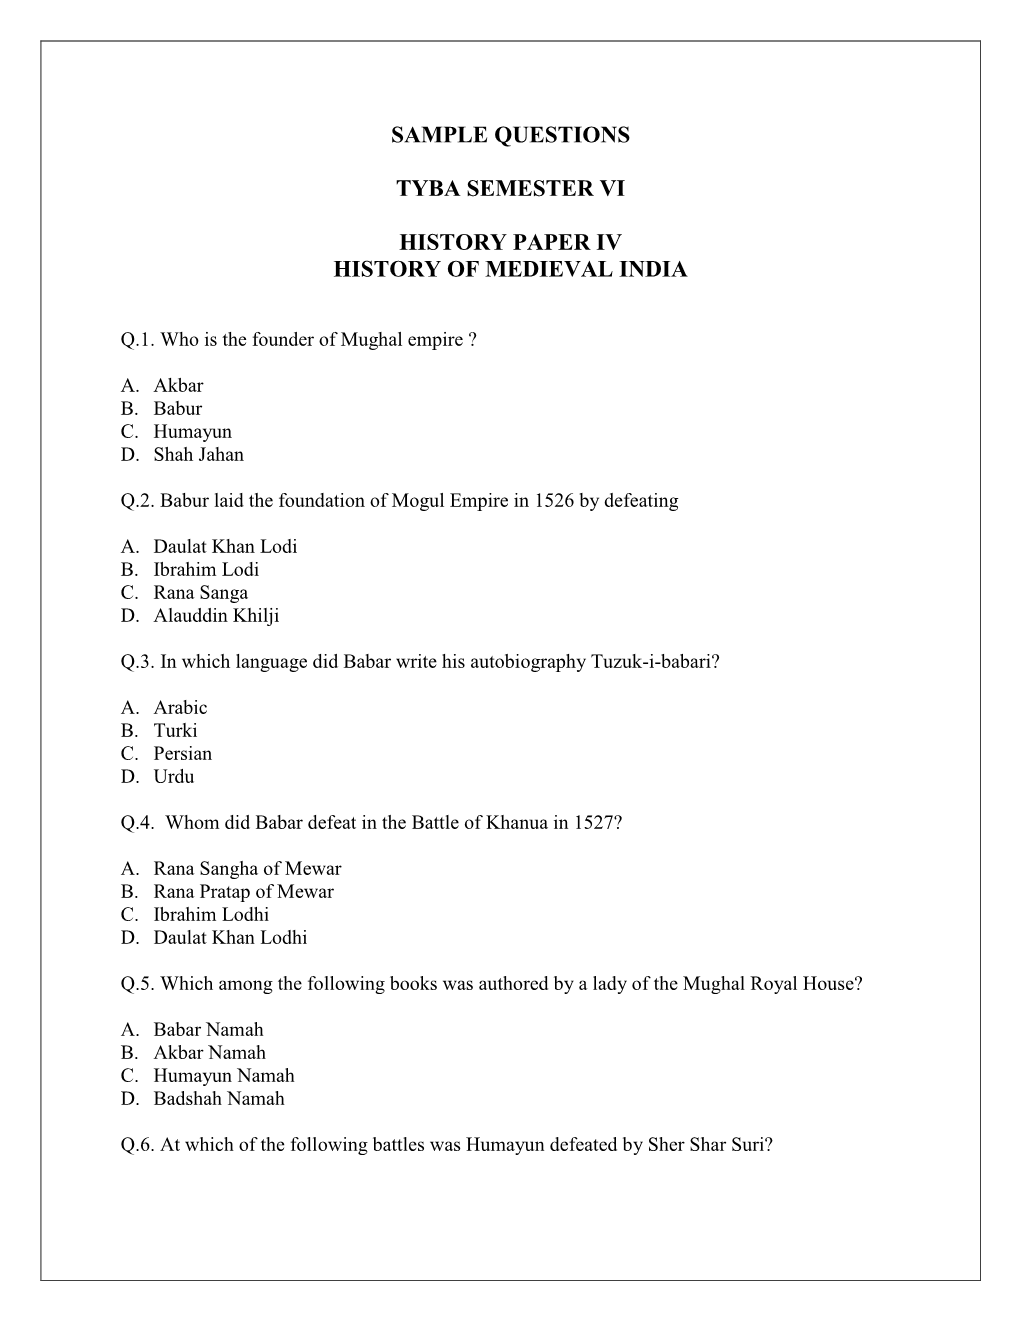 Sample Questions Tyba Semester Vi History Paper Iv History of Medieval India